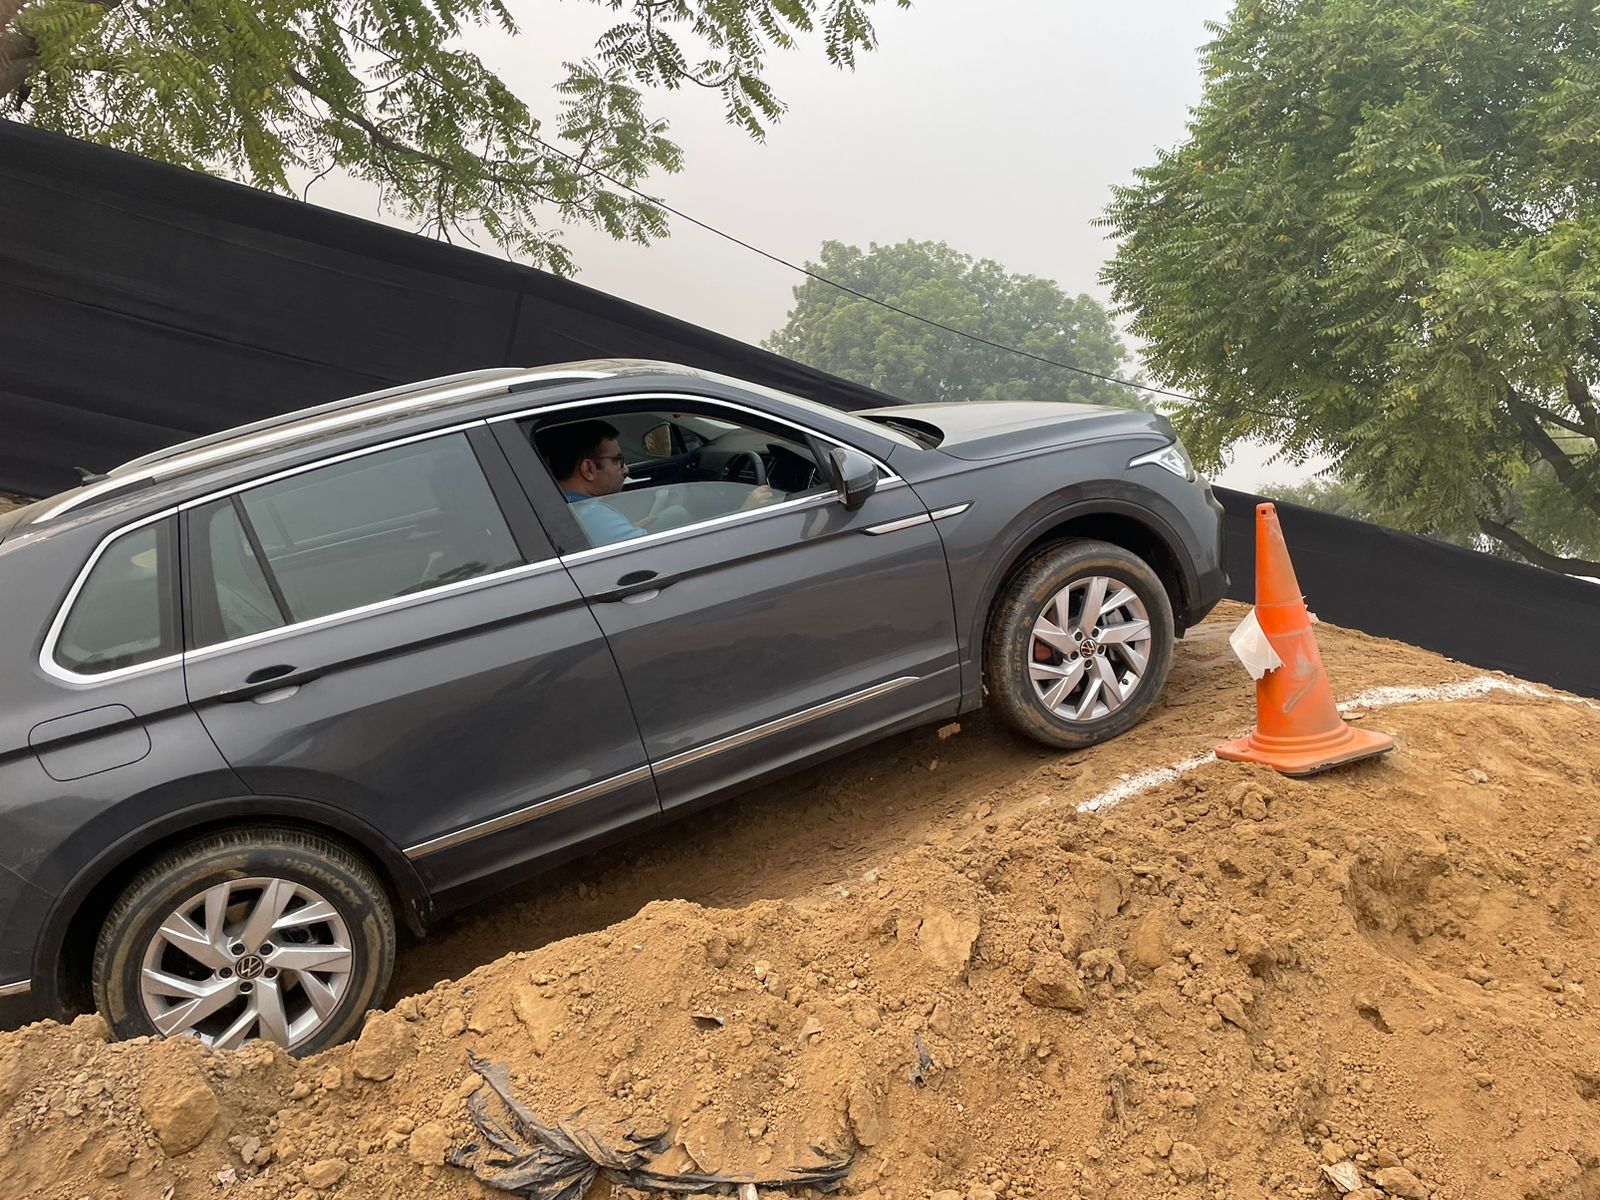 Volkswagen Tiguan Off-Road Review: Can It Handle The Rough Stuff?